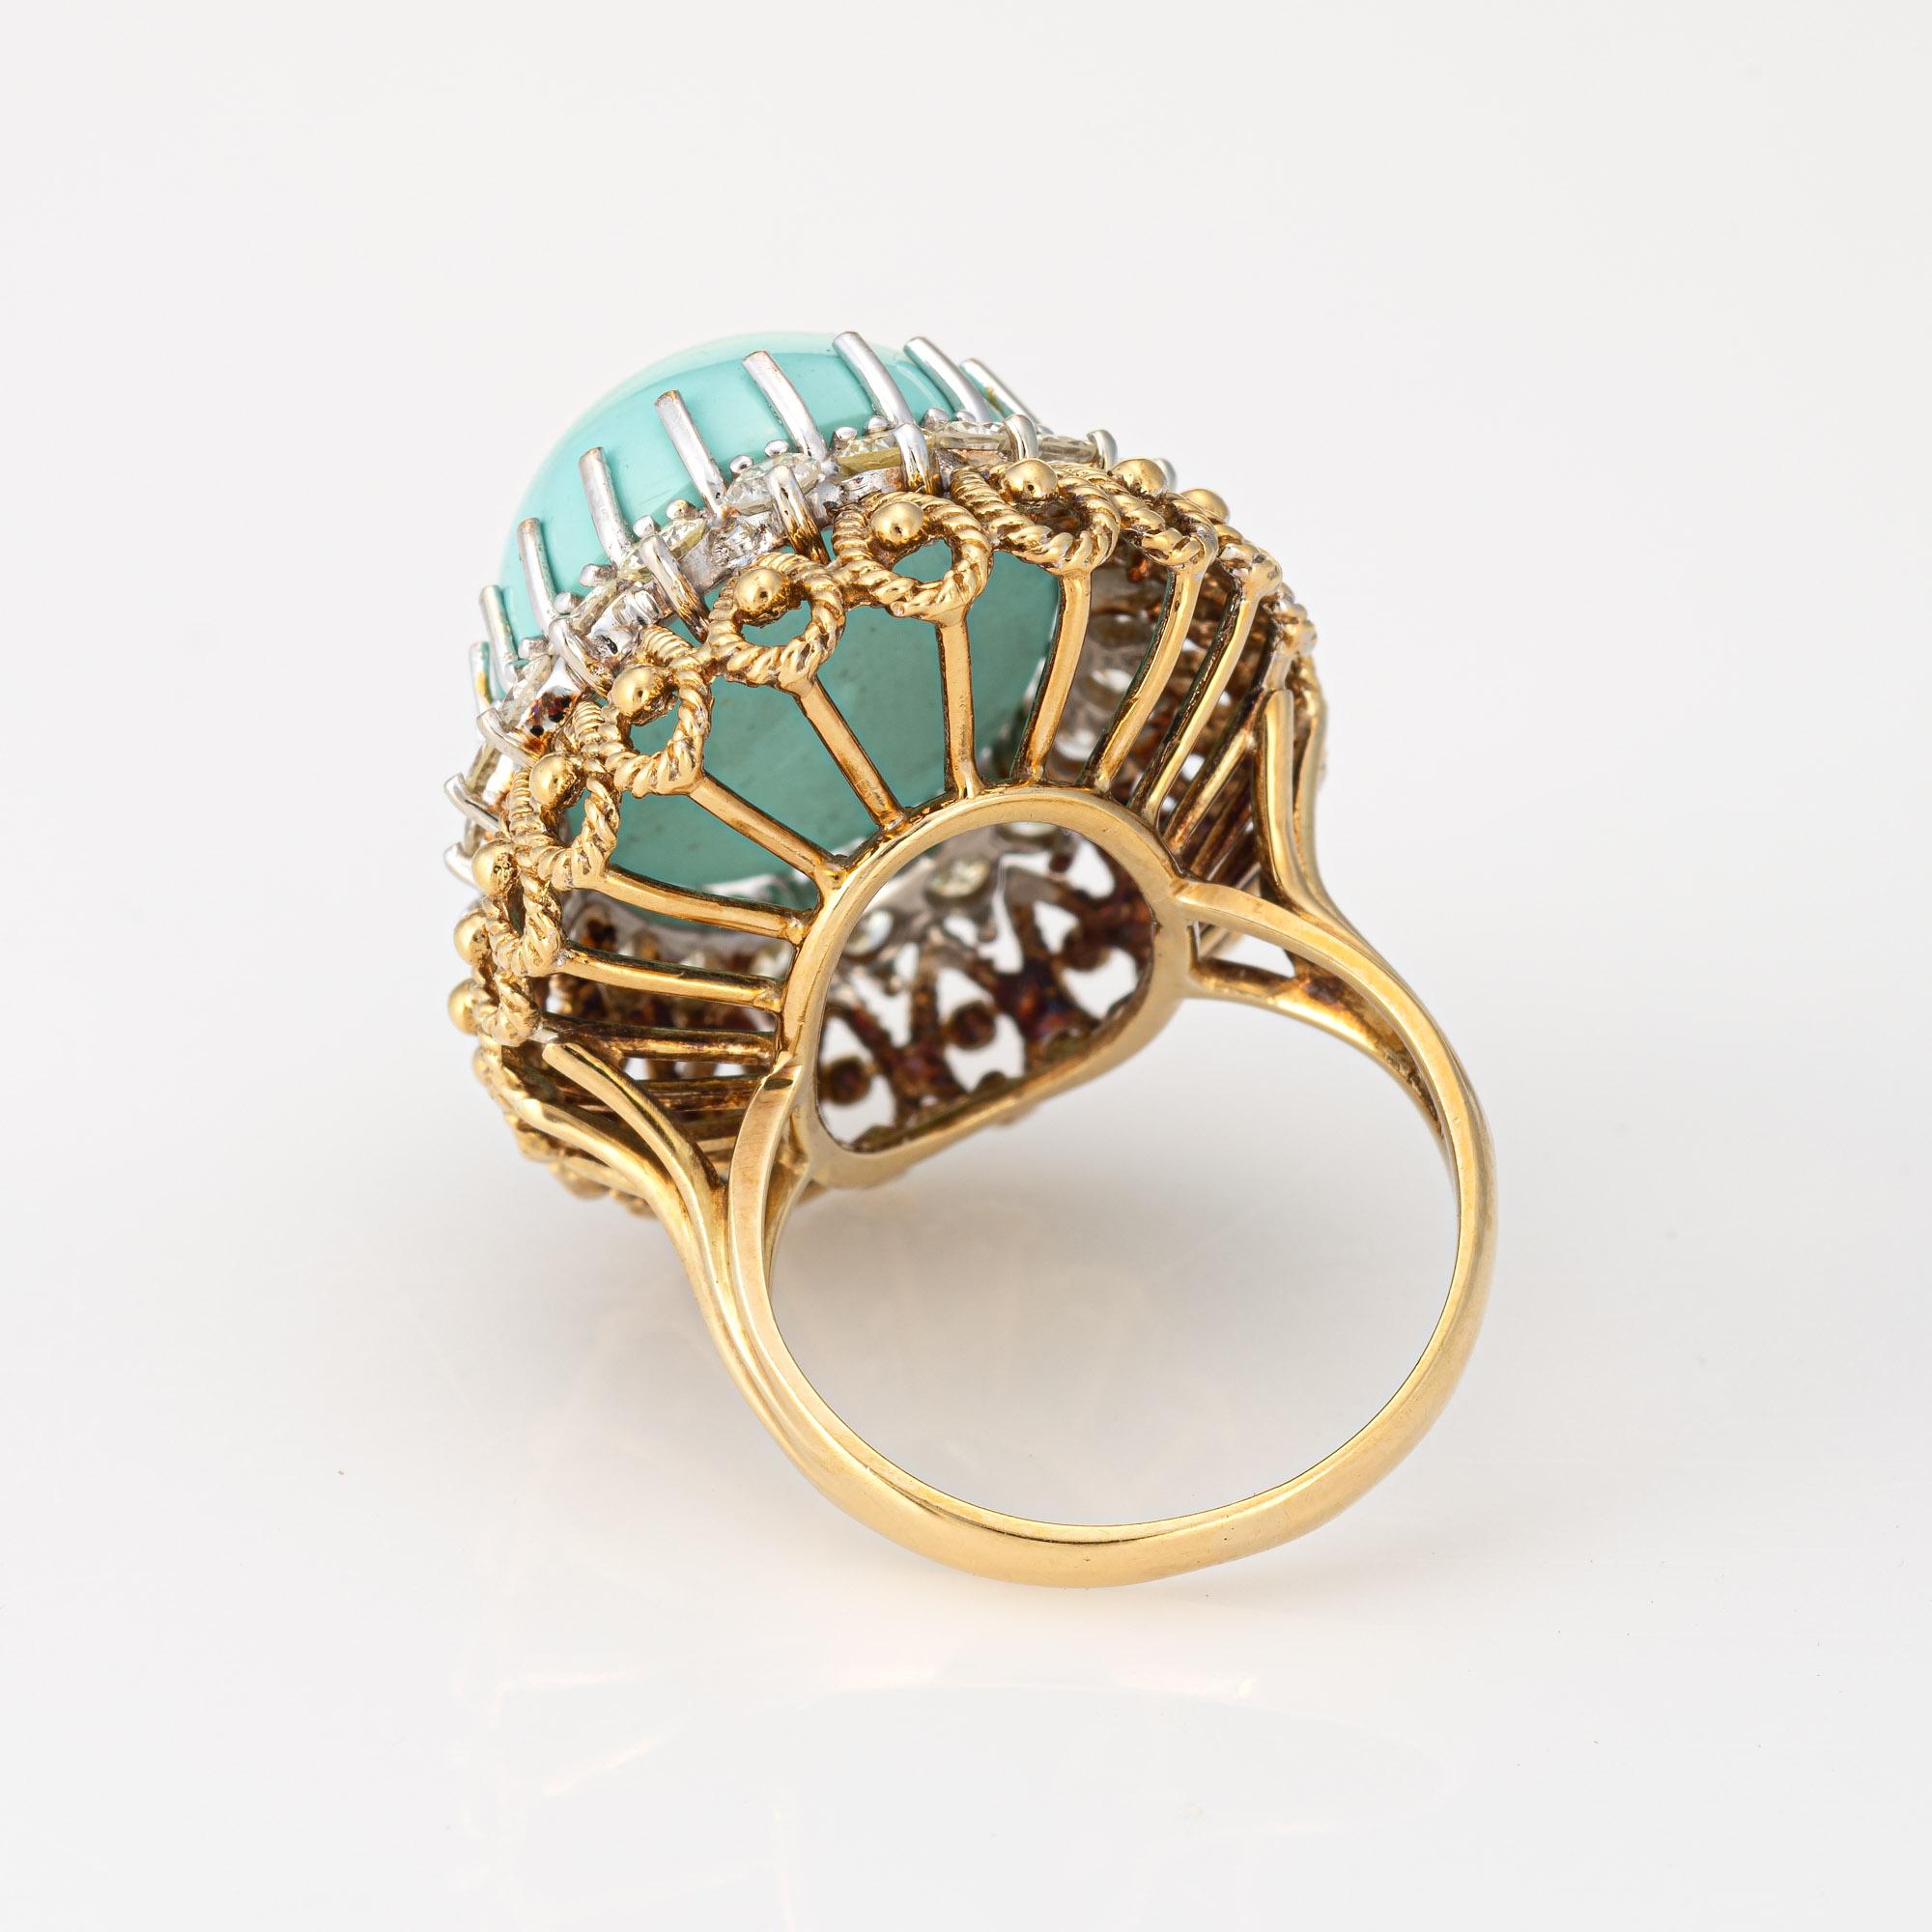 Modern 60s Turquoise Diamond Ring Vintage 18k Yellow Gold Large Oval Cocktail Jewelry